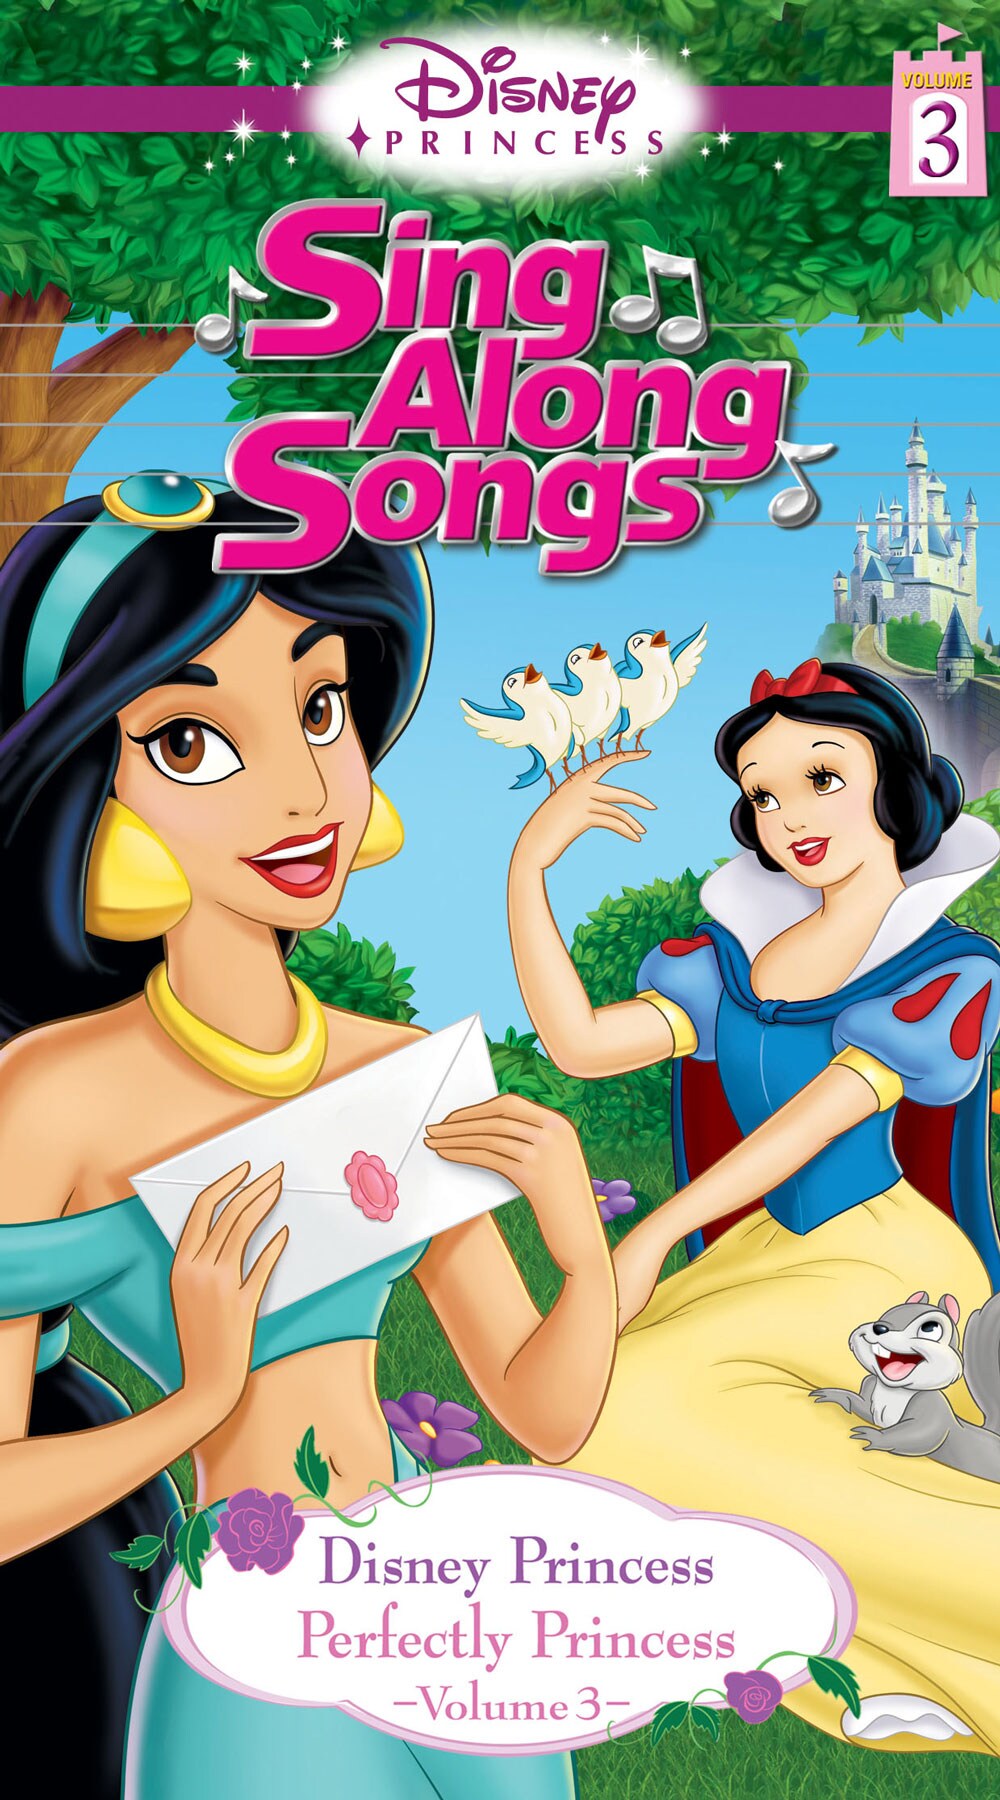 disney princess sing along songs vol.1 once upon a dream